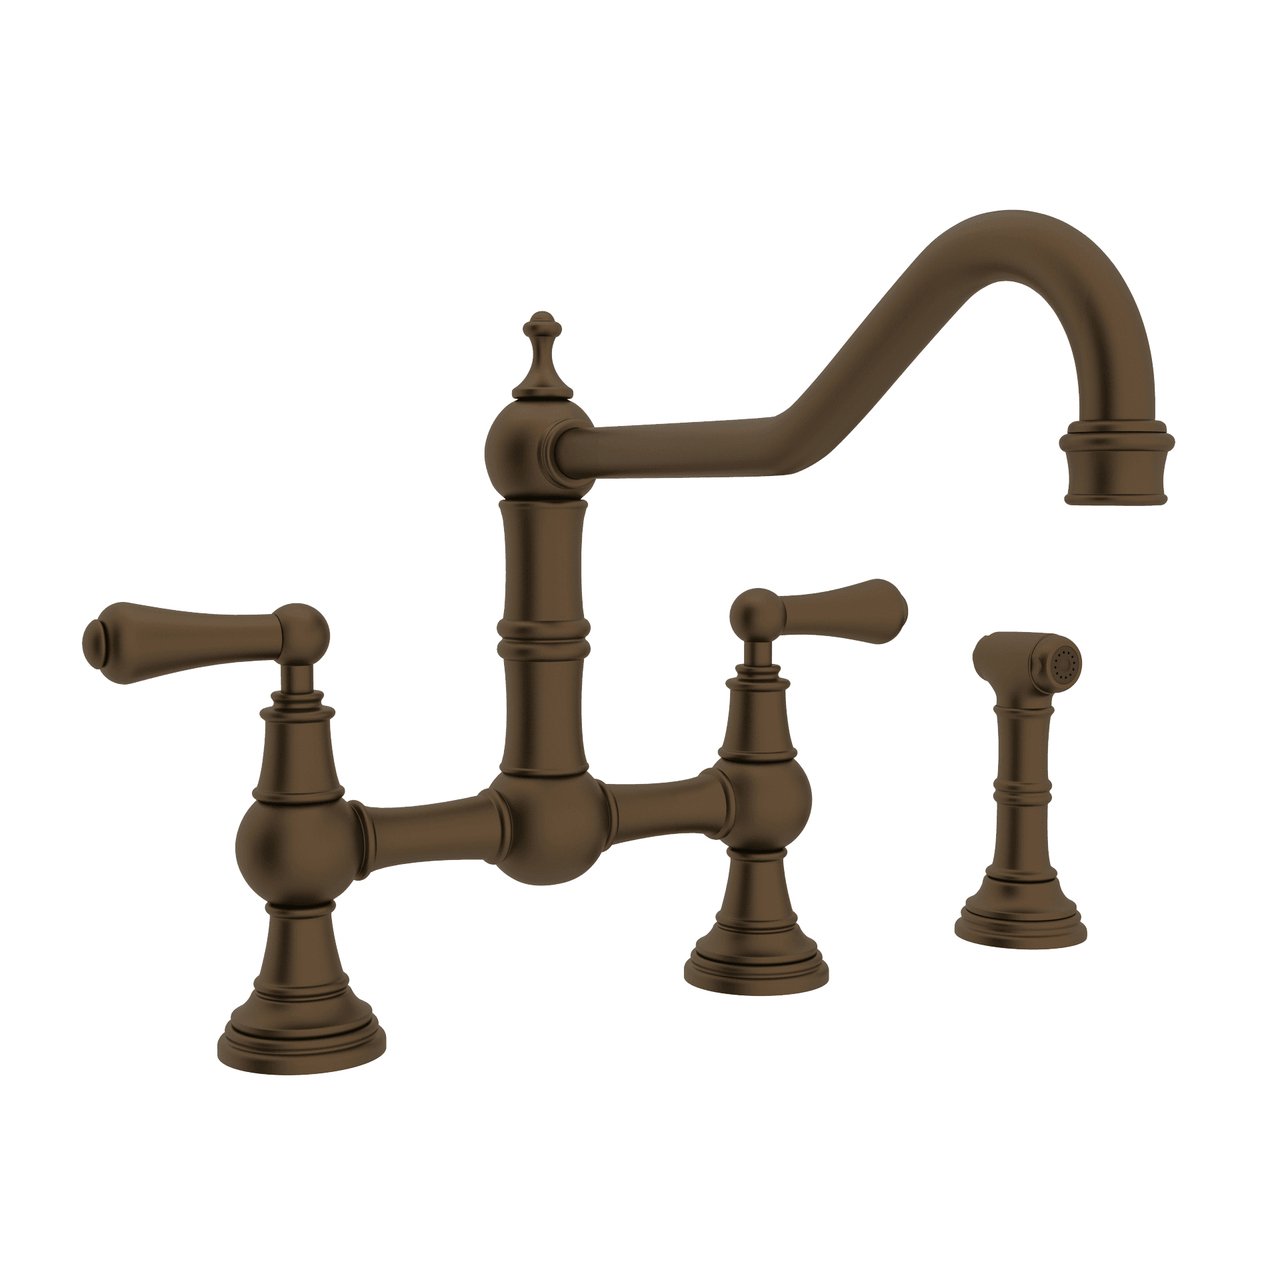 Perrin & Rowe Edwardian Bridge Kitchen Faucet with Sidespray - BNGBath